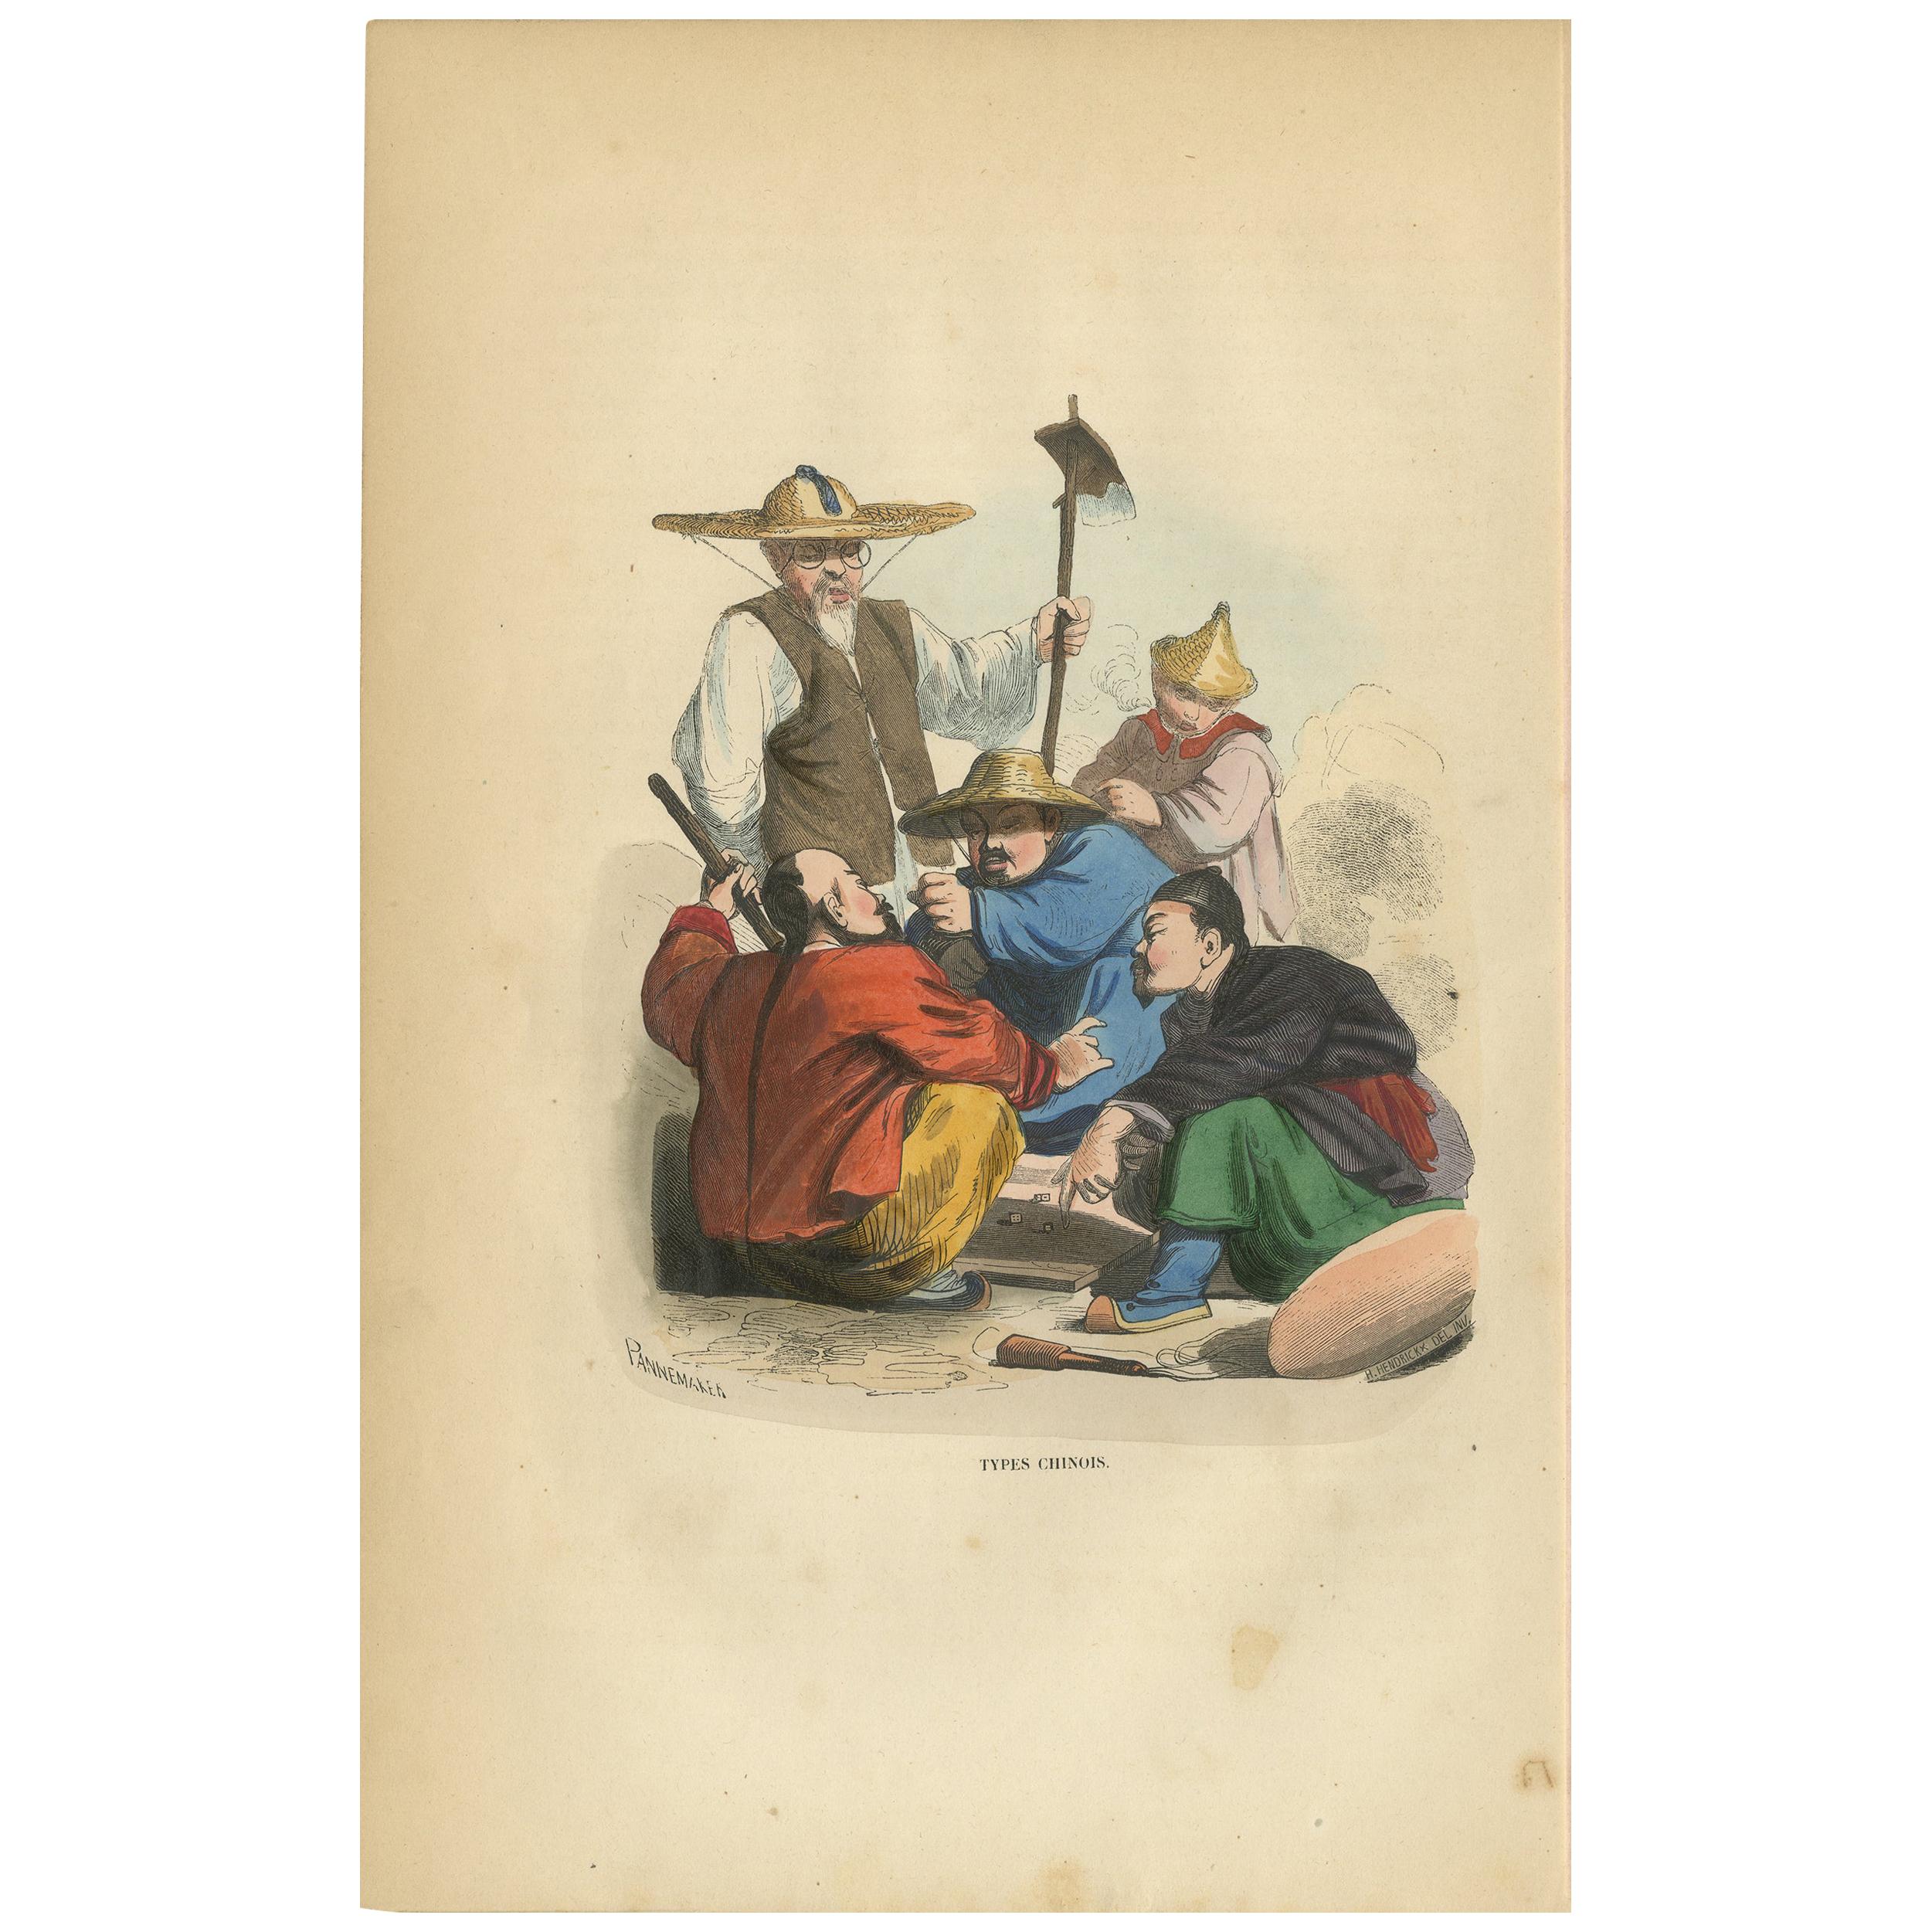 Antique Print of Chinese Men's Playing a Game of Dice by Wahlen, 1843